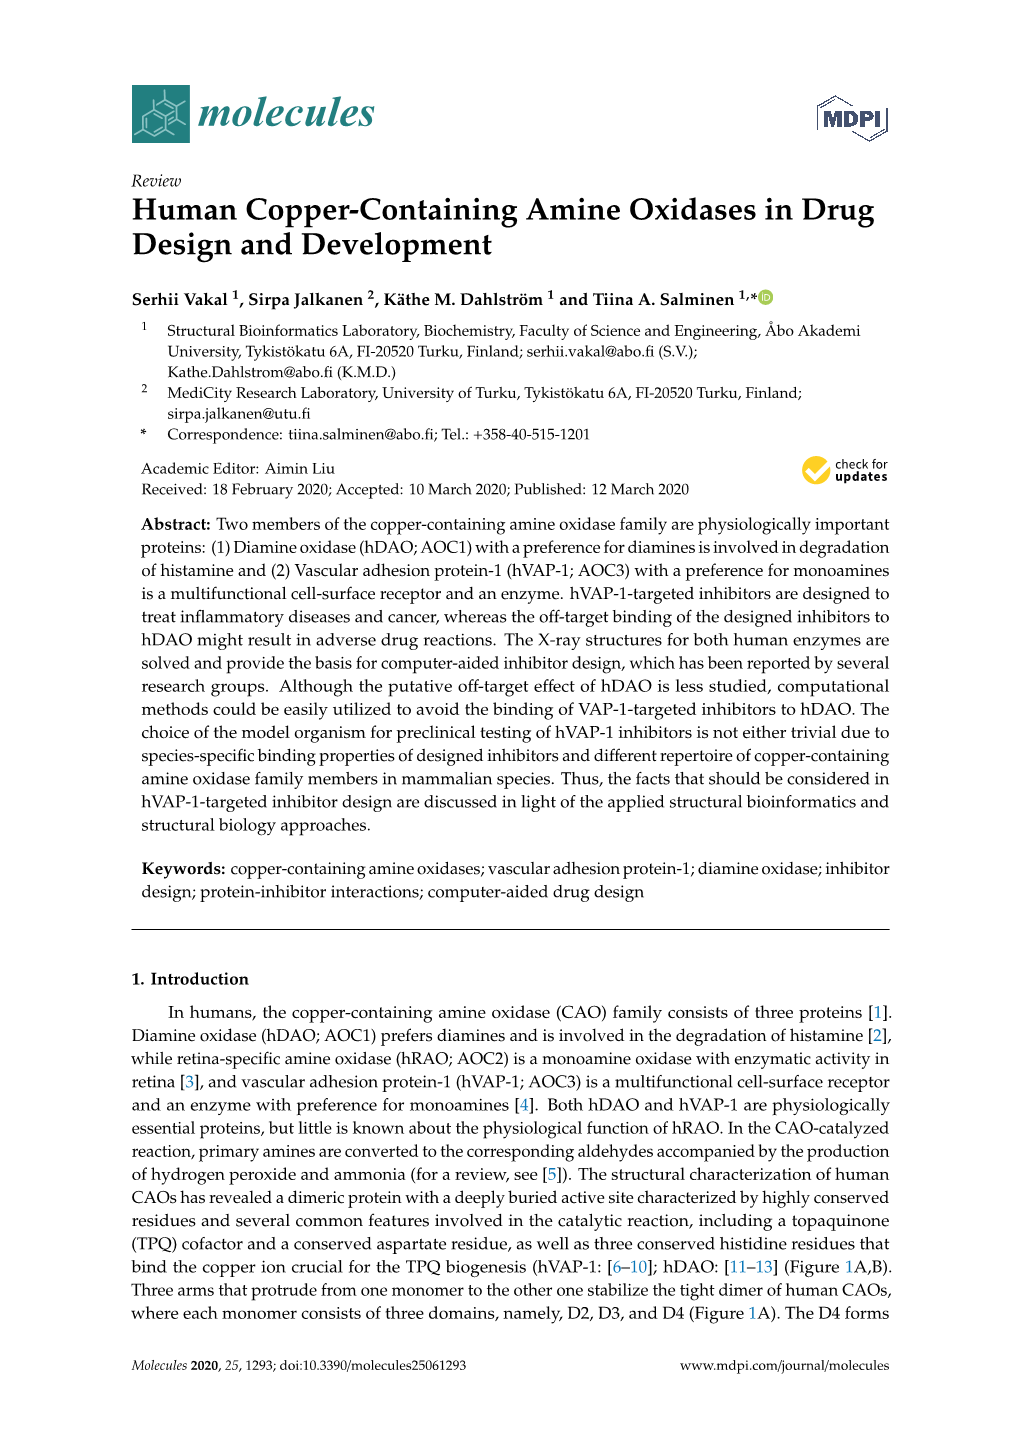 Human Copper-Containing Amine Oxidases in Drug Design and Development